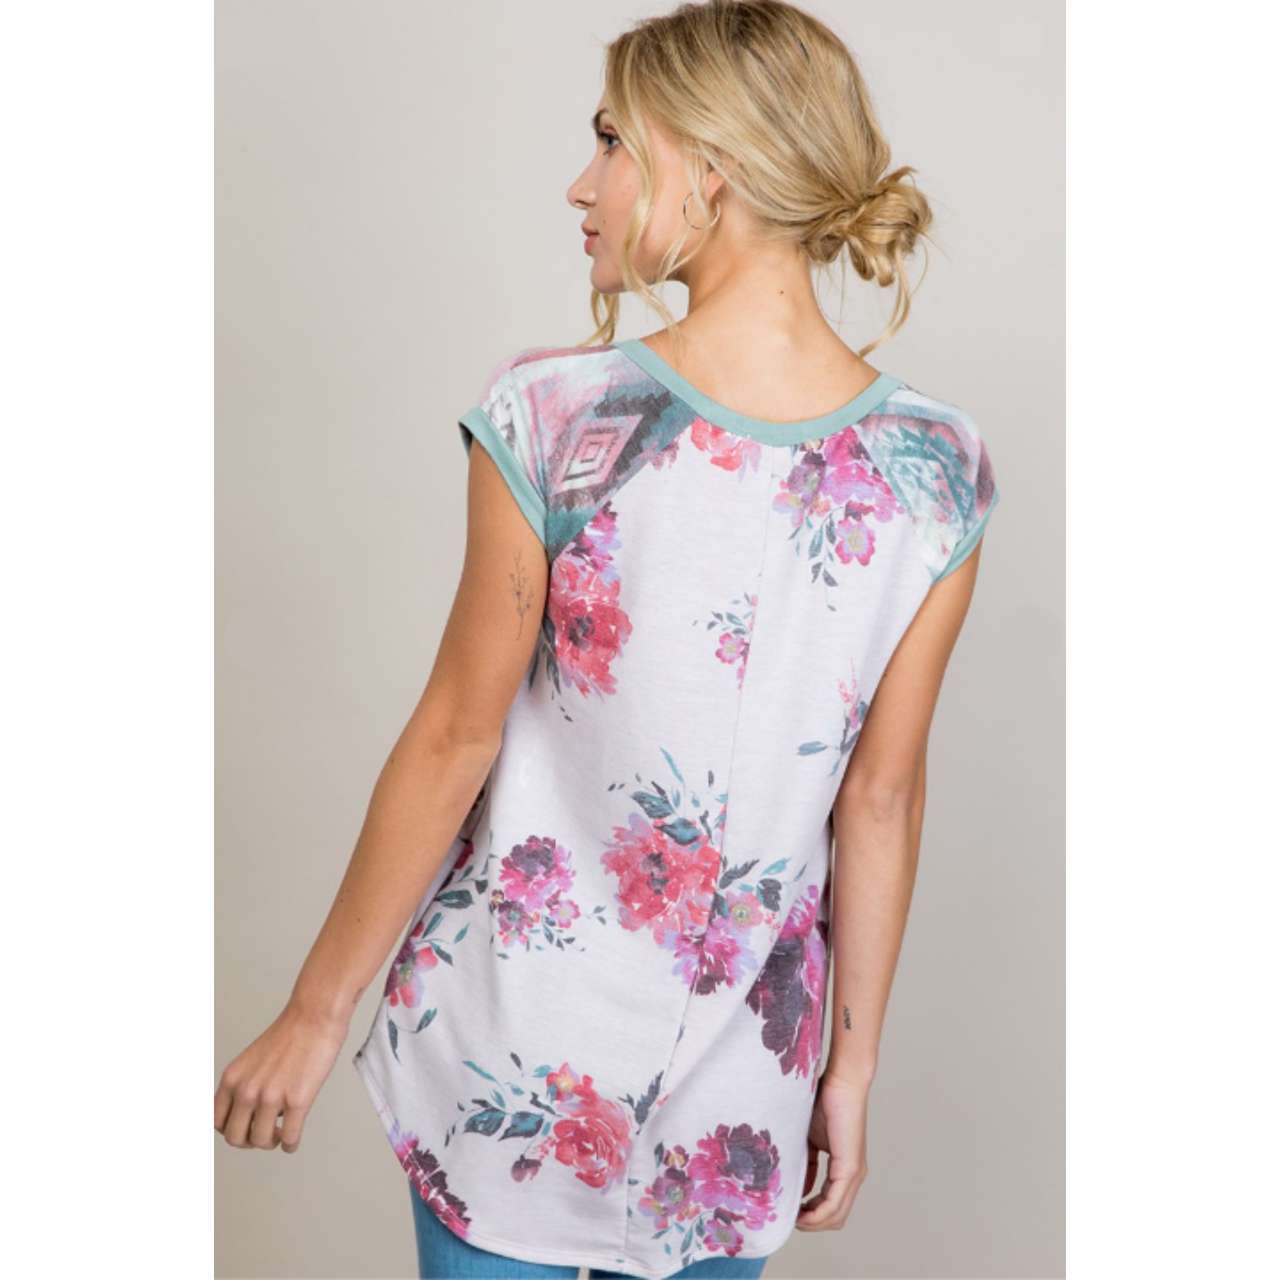 Gracie Floral Top - Plus Size - The Graphic Tee